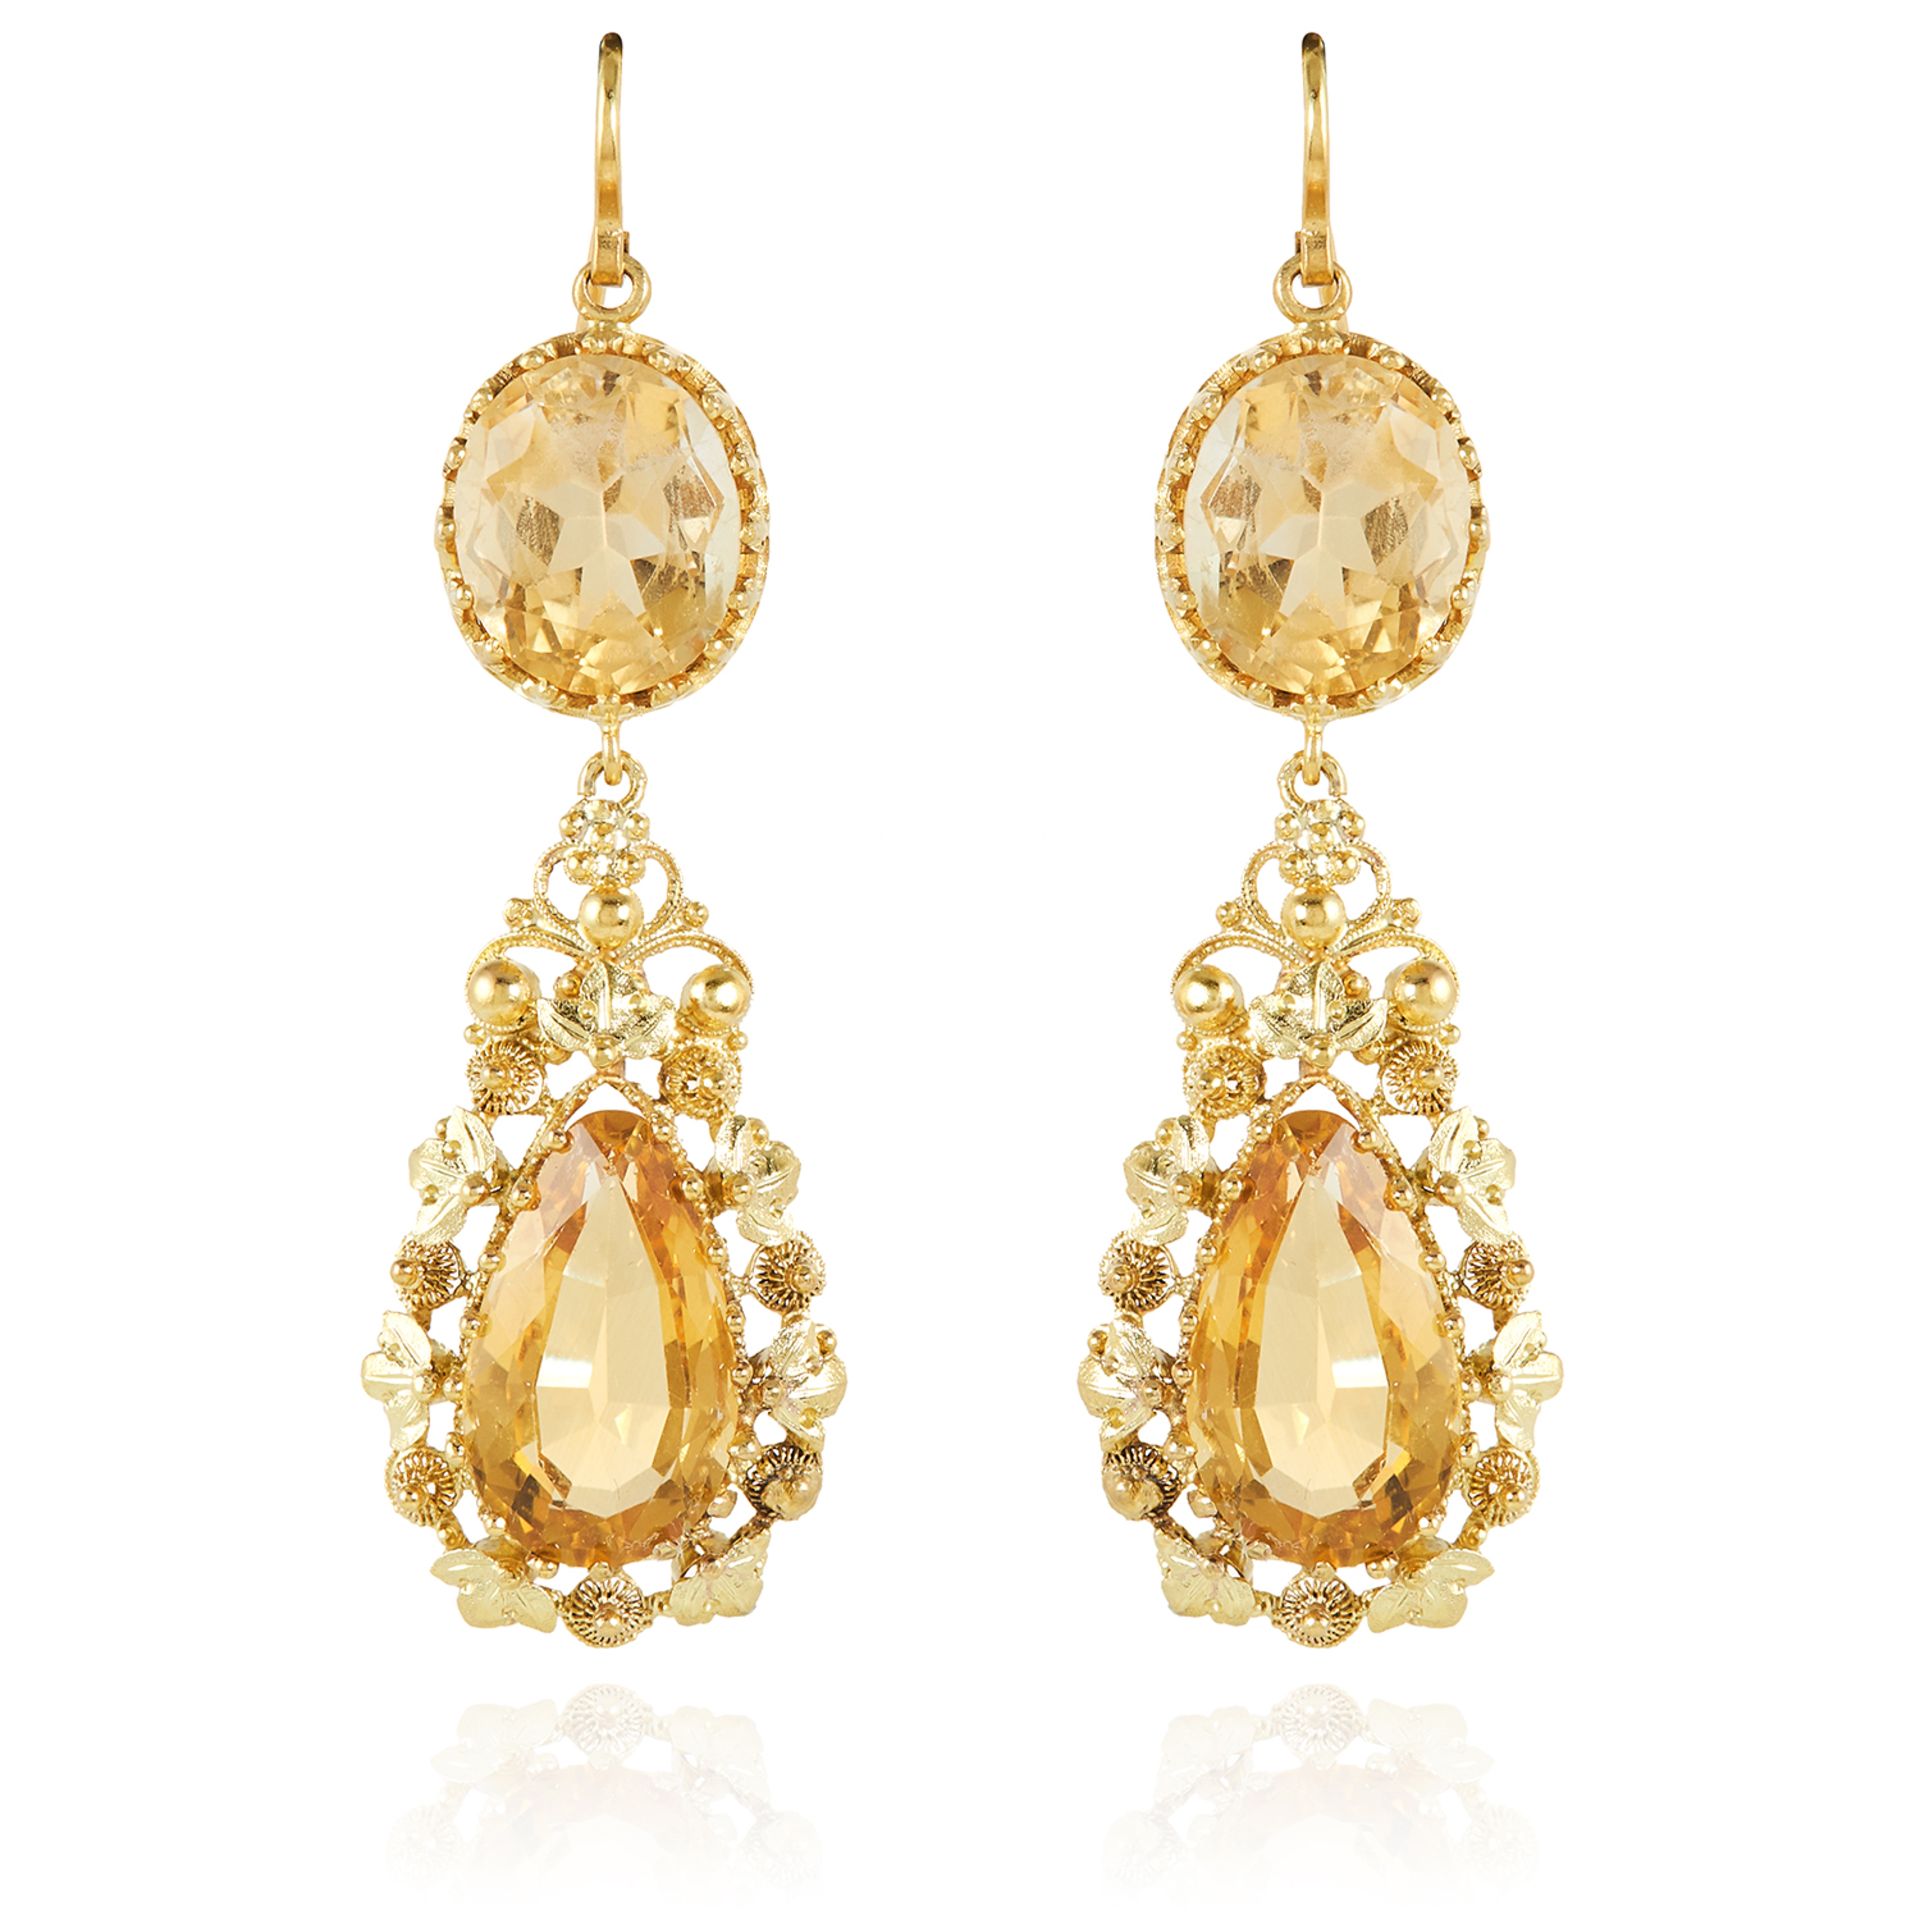 A PAIR OF ANTIQUE CITRINE EARRINGS in high carat yellow gold, each set with an oval cut citrine